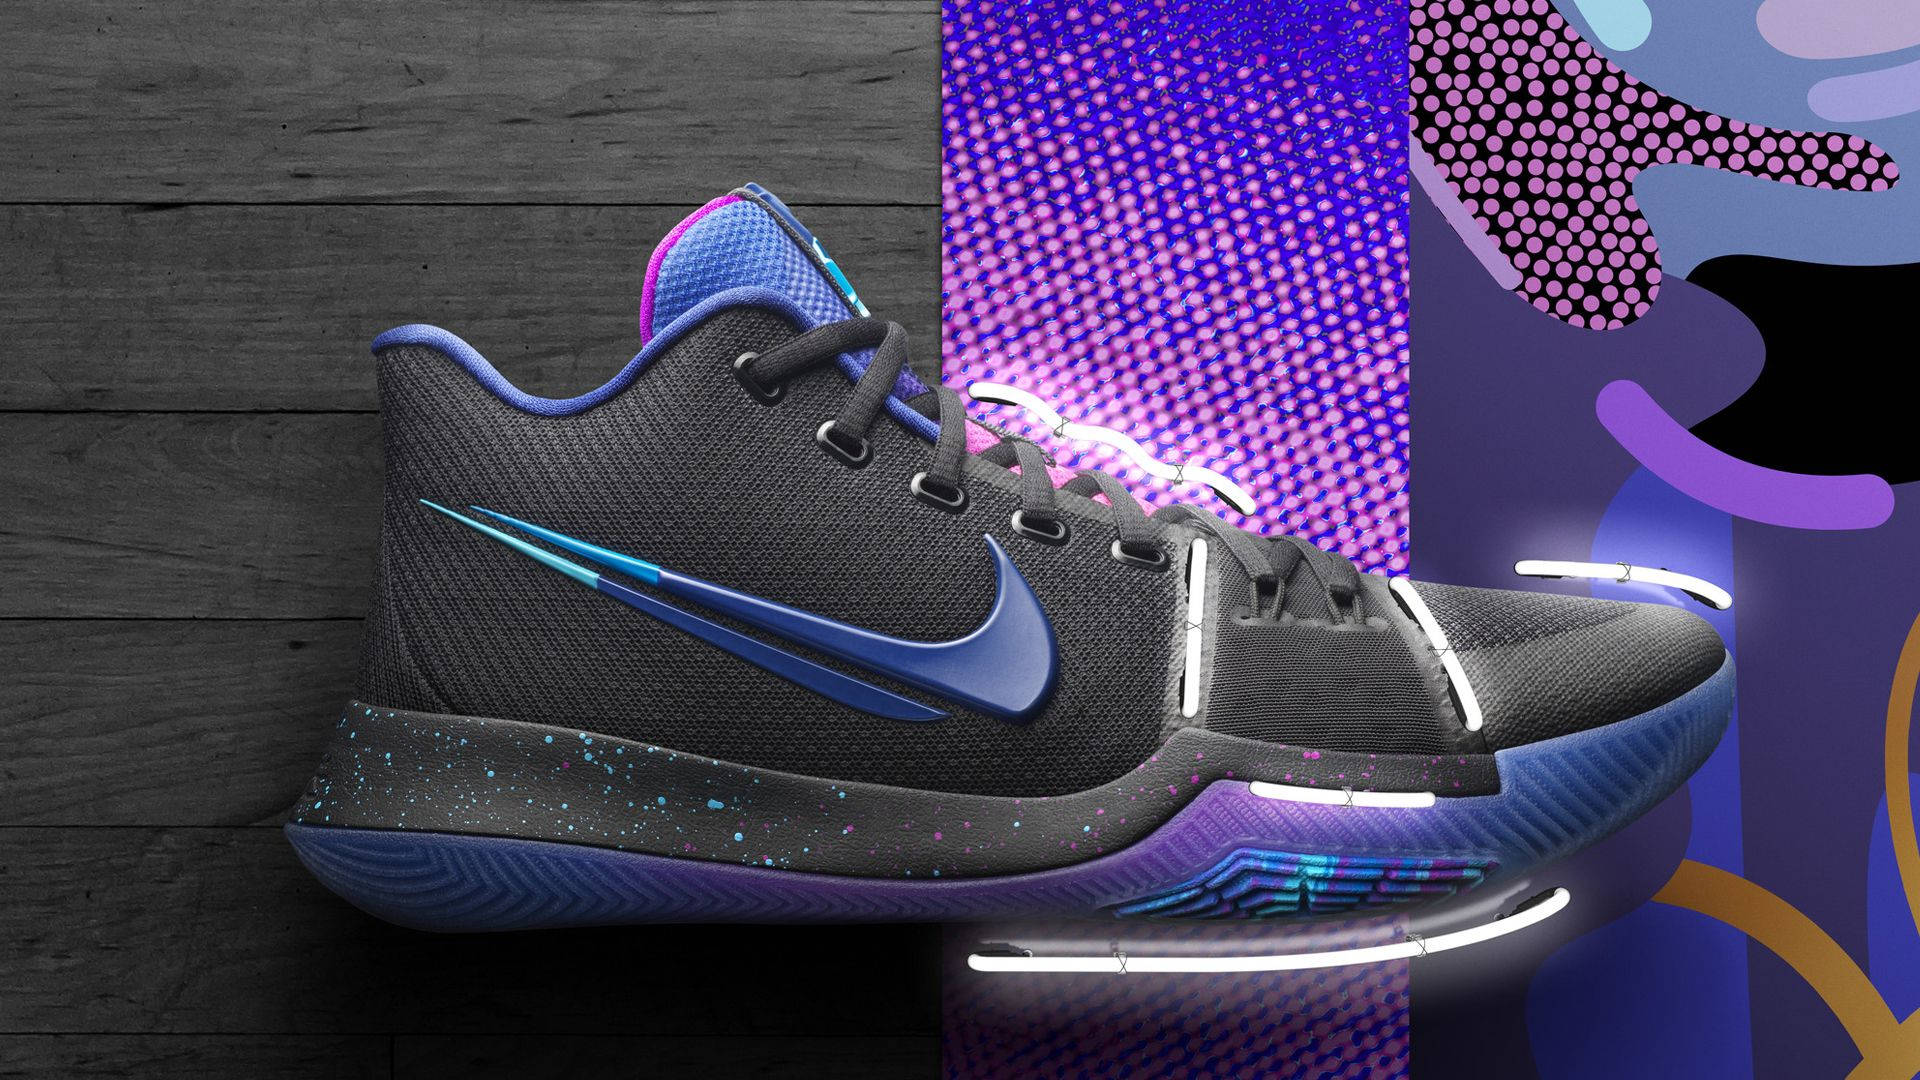 Make a Statement with this Stylish and Cool Nike Shoe Wallpaper